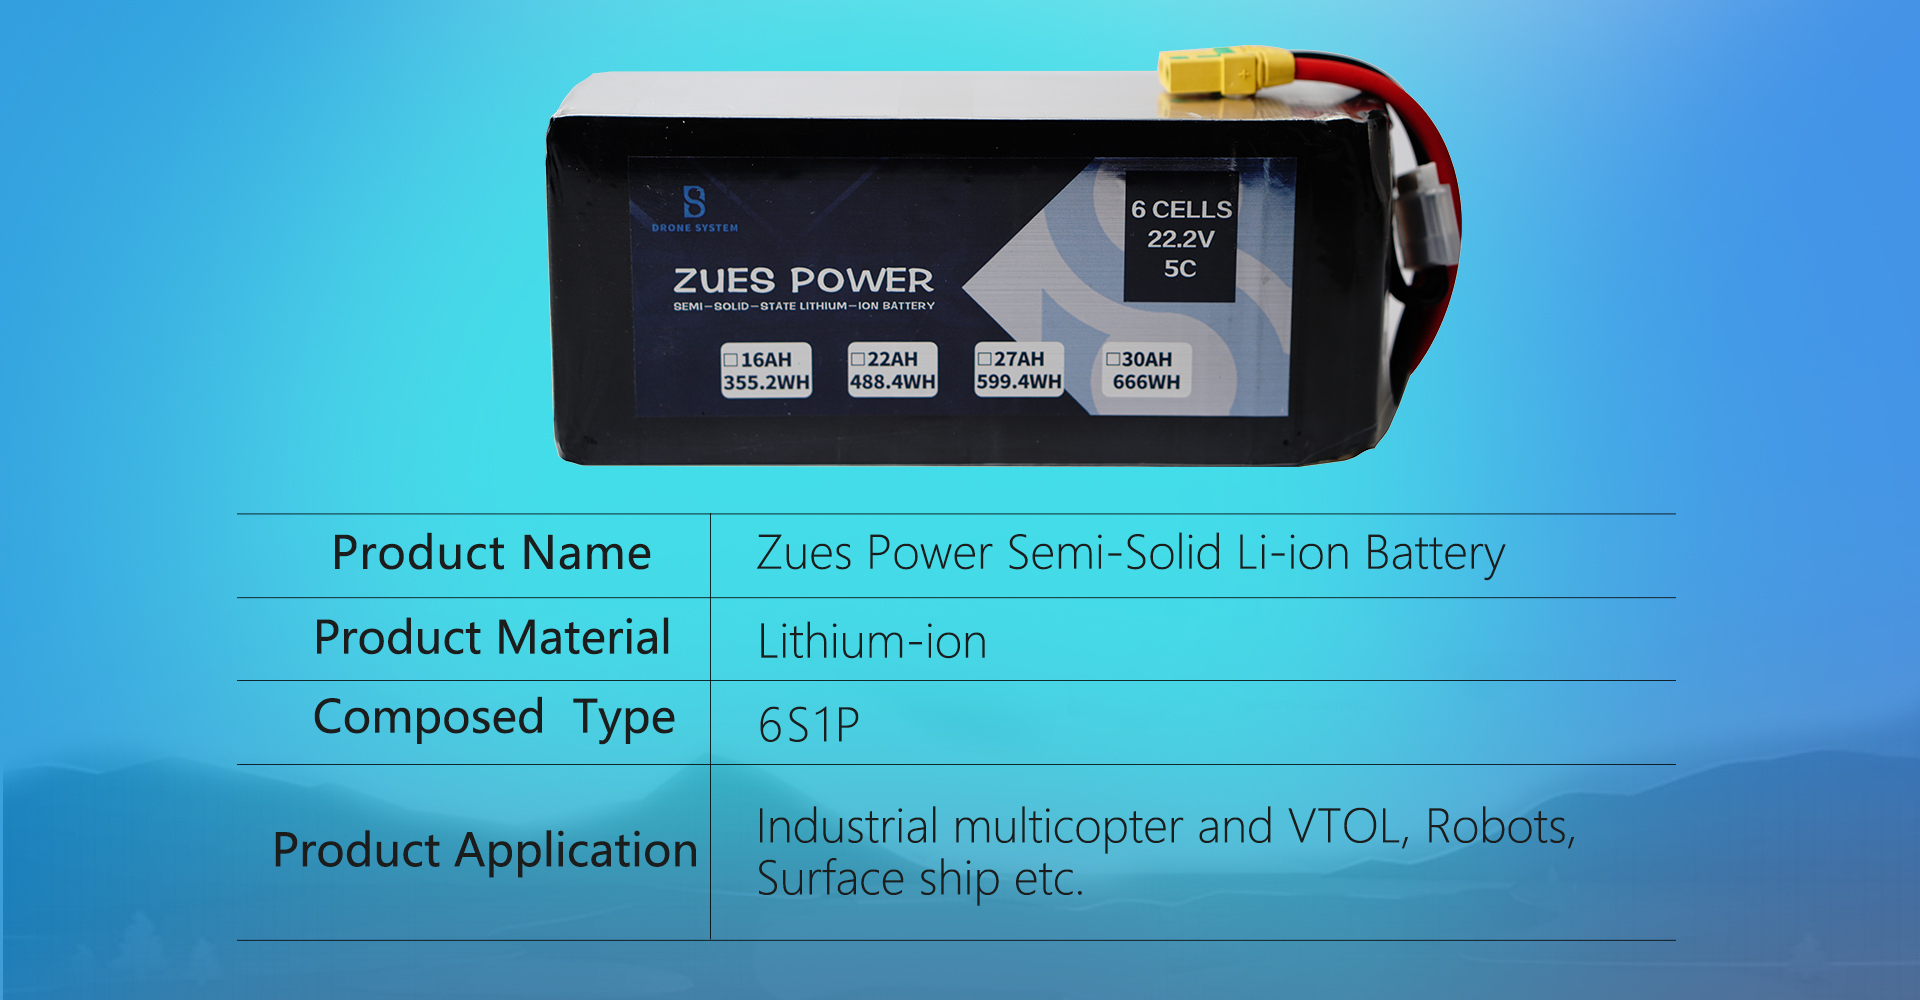 Zues Power Semi-Solid Li-ion Battery 5C 6S  